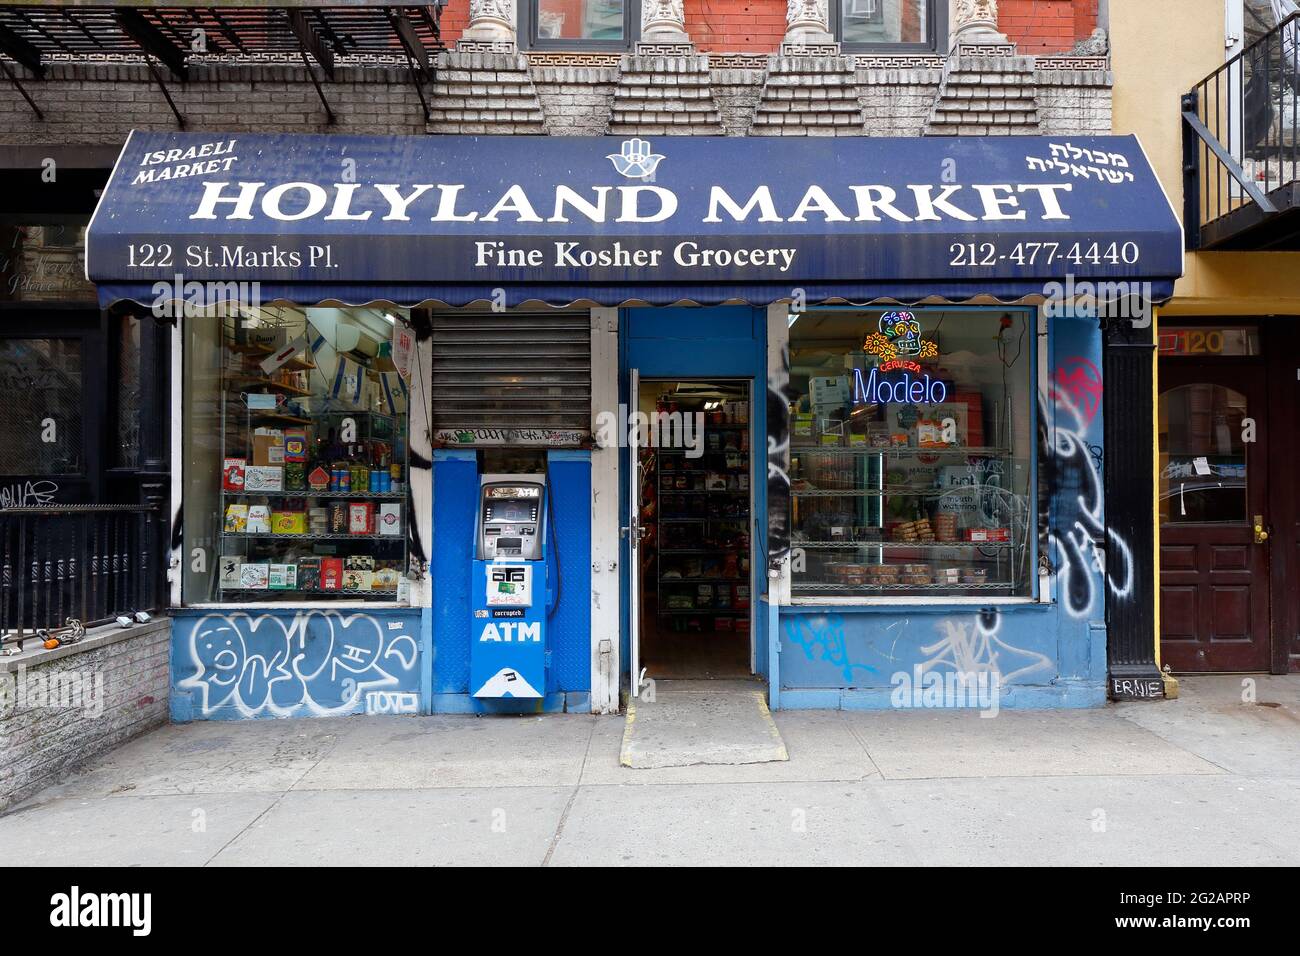 [historical storefront] Holyland Market, 122 St Marks Pl, New York, NYC storefront photo of an Israeli grocery in the East Village neighborhood. Stock Photo